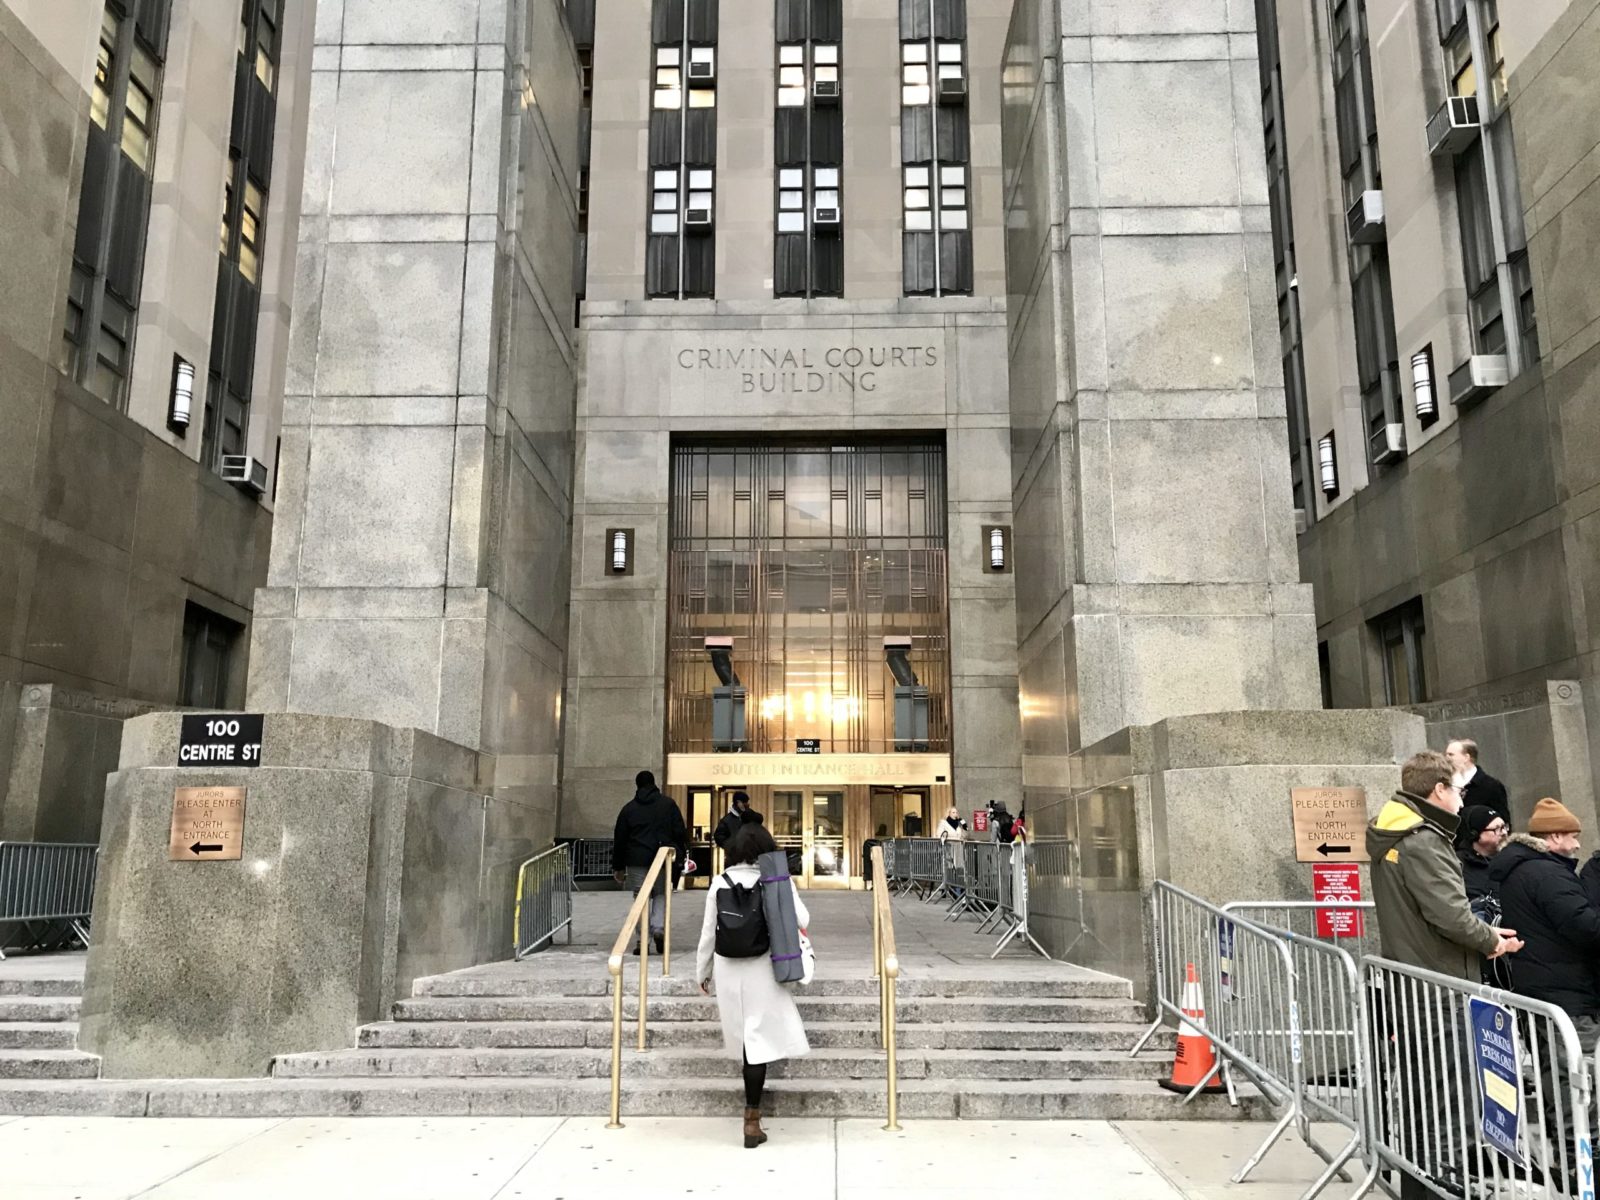 South entrance of NYC Criminal Courts Building / Photo by Caroline Chen for NY City Lens